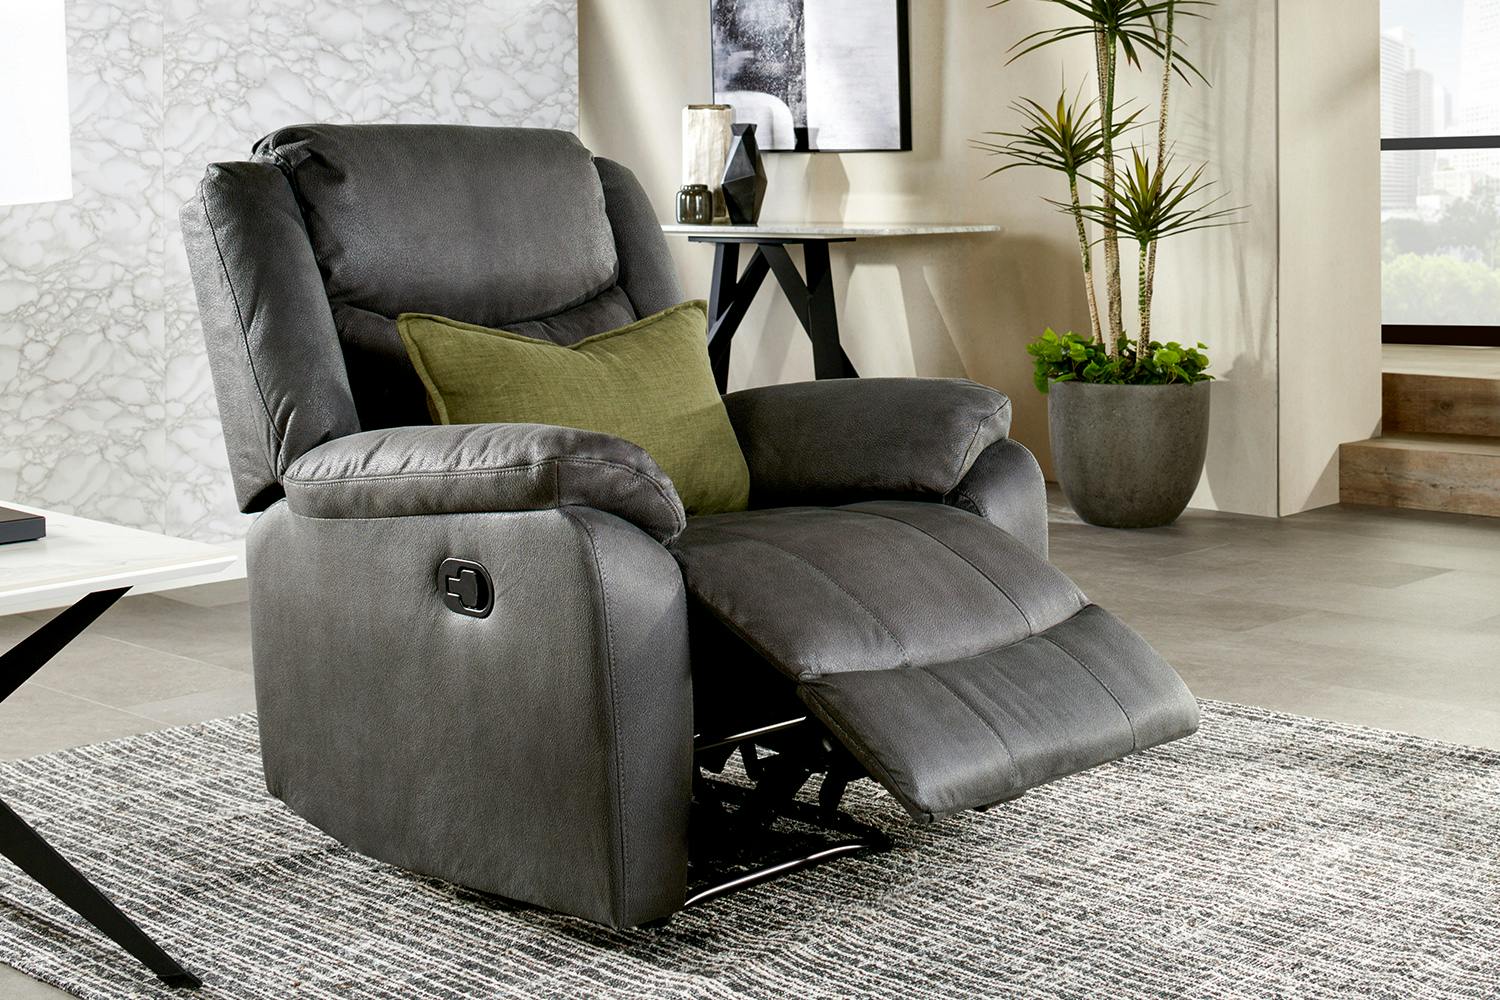 Balmoral Fabric Recliner Chair